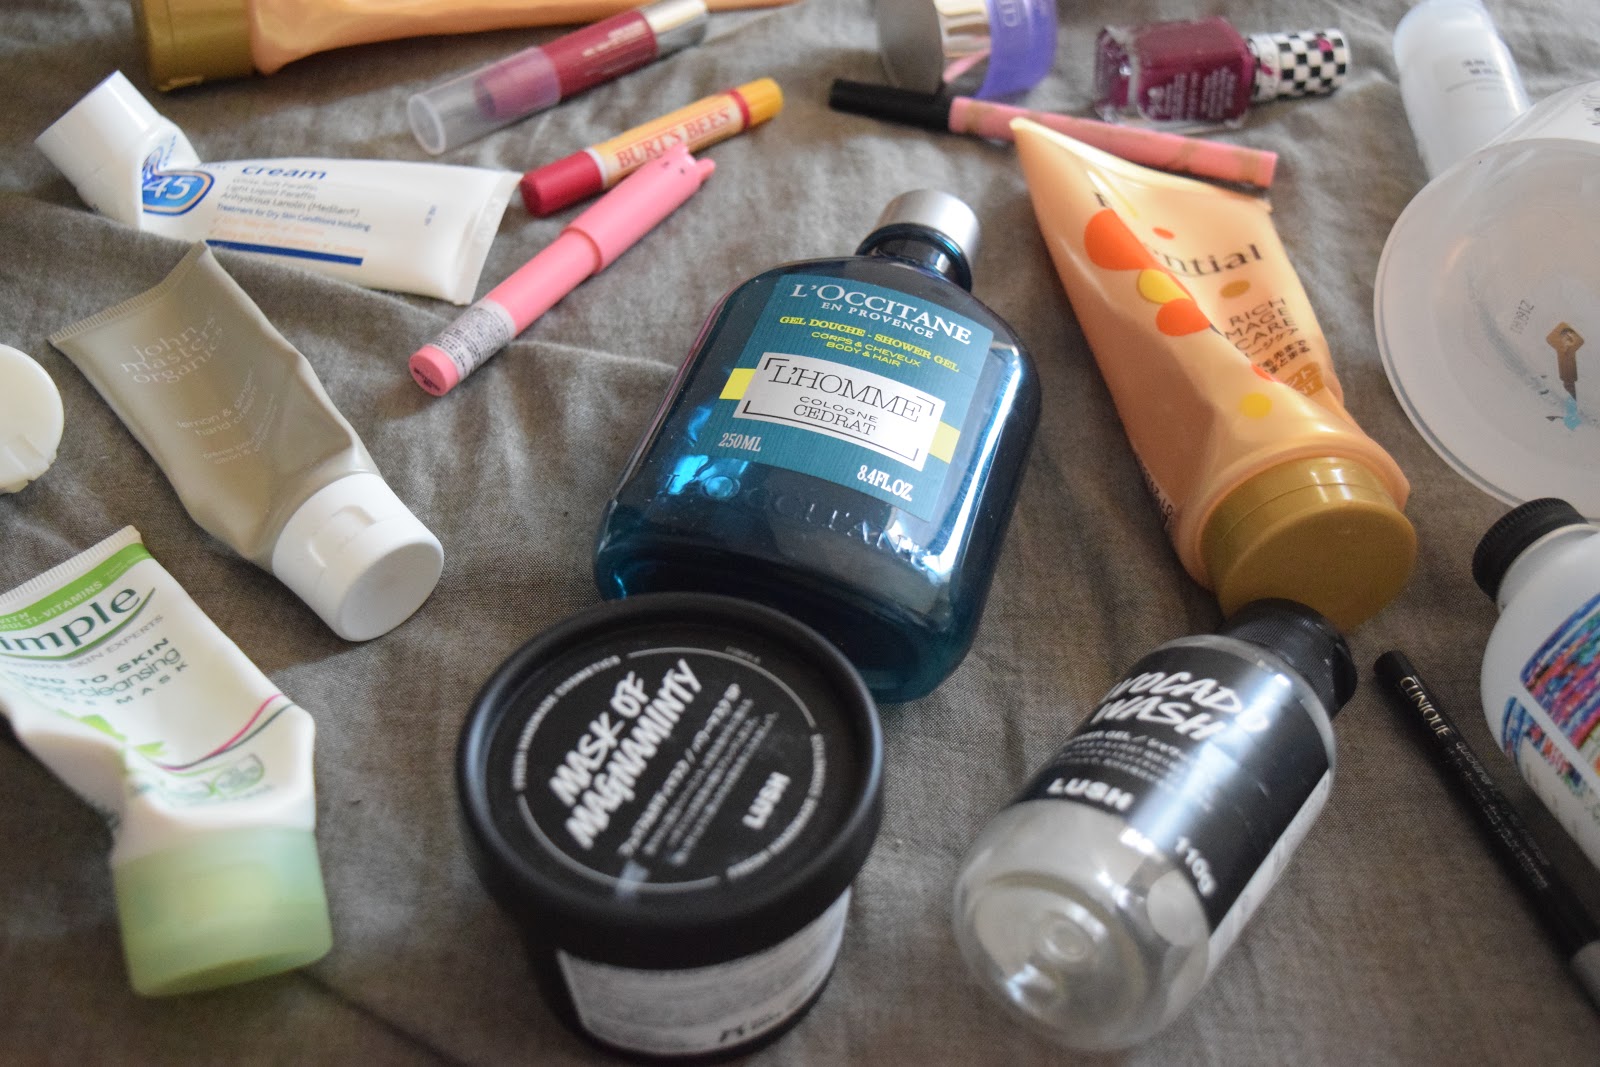 Flatlay of empty beauty products including skincare, makeup and hair care